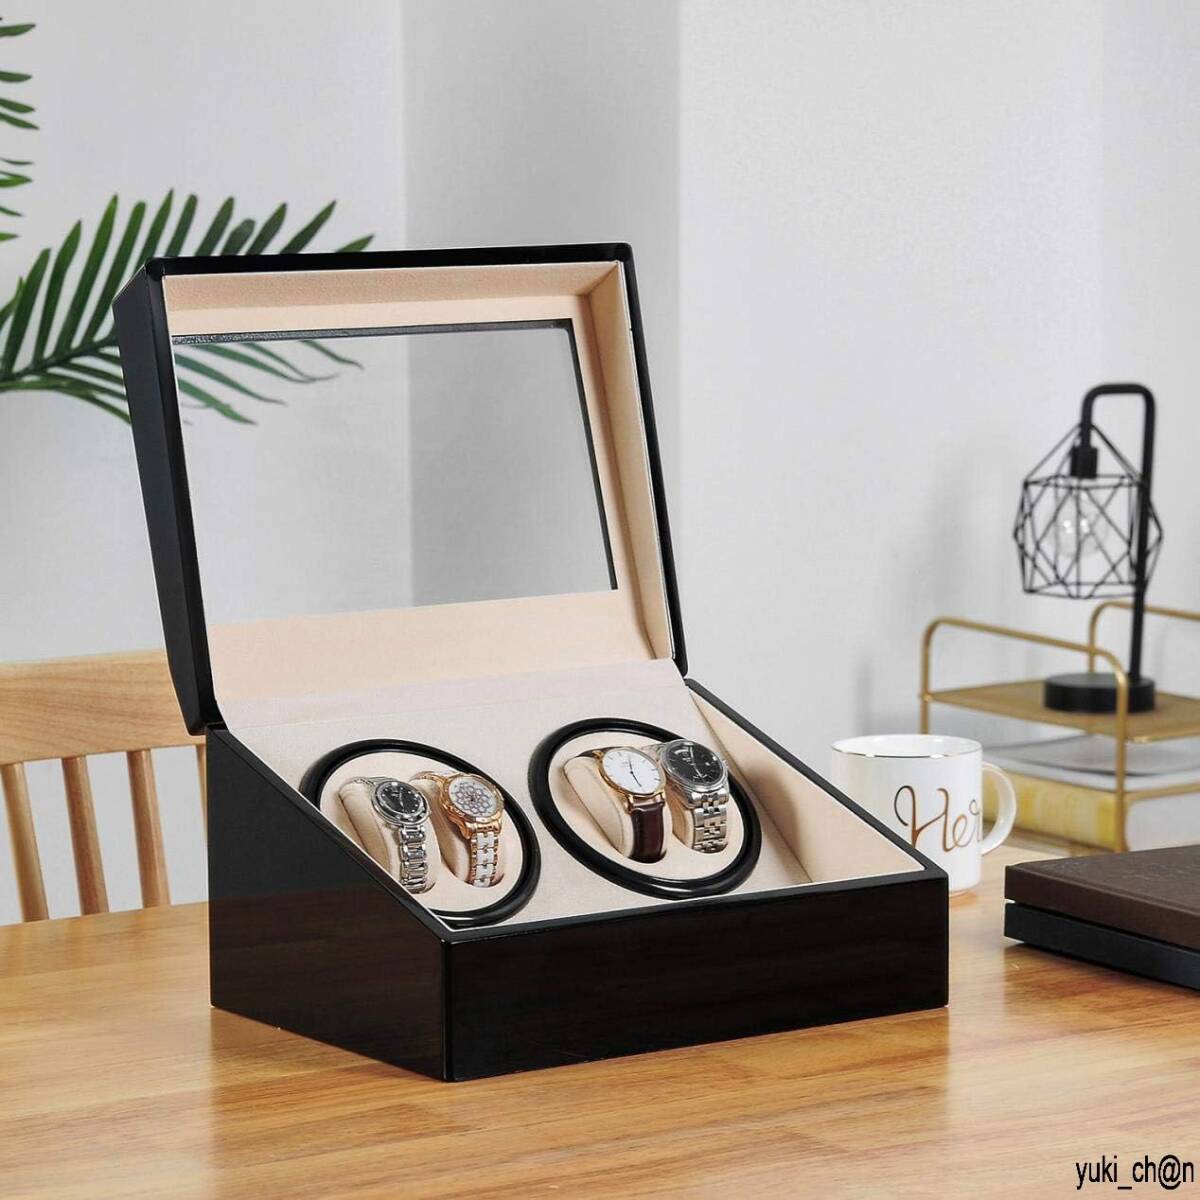  winding machine black piano specular finish 4ps.@ to coil +6ps.@ storage watch Winder self-winding watch clock made in Japan Mabuchi motor high class 